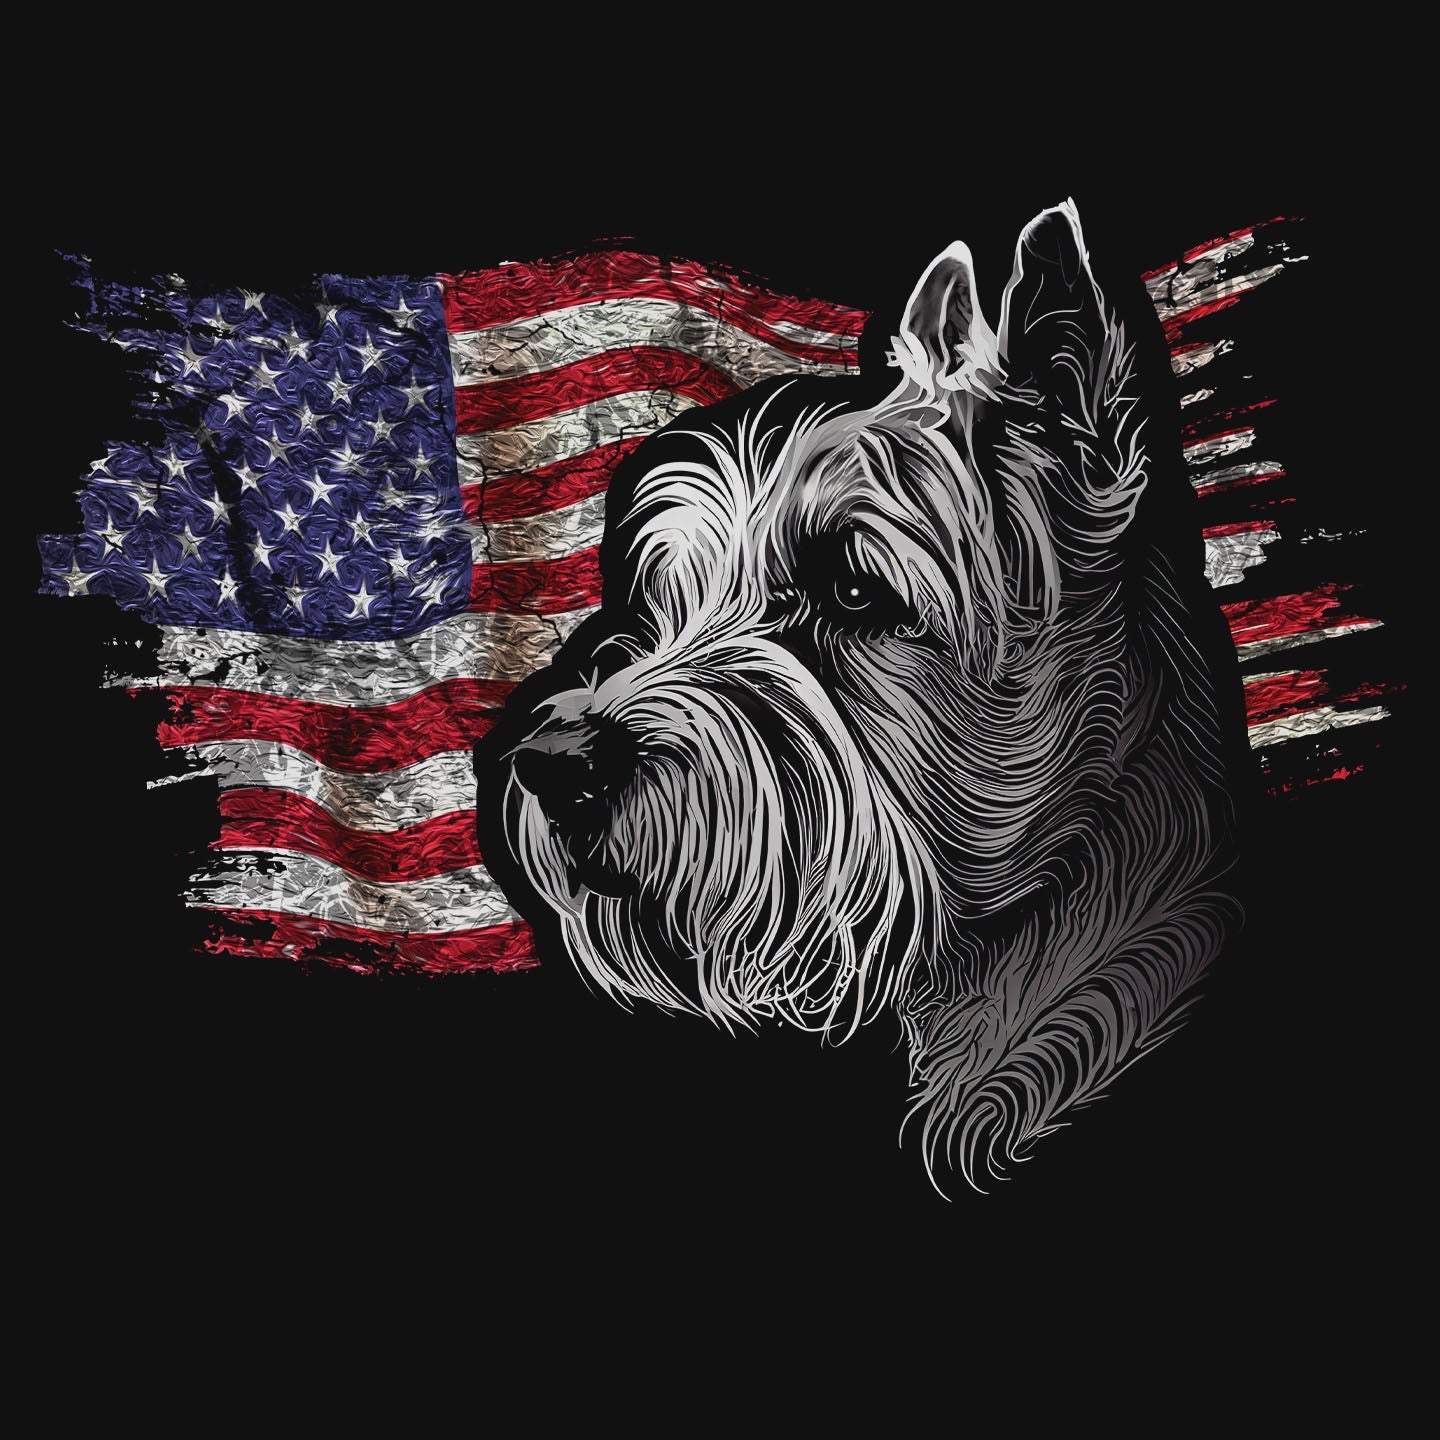 Patriotic Russell Terrier American Flag - Adult Unisex T-Shirt